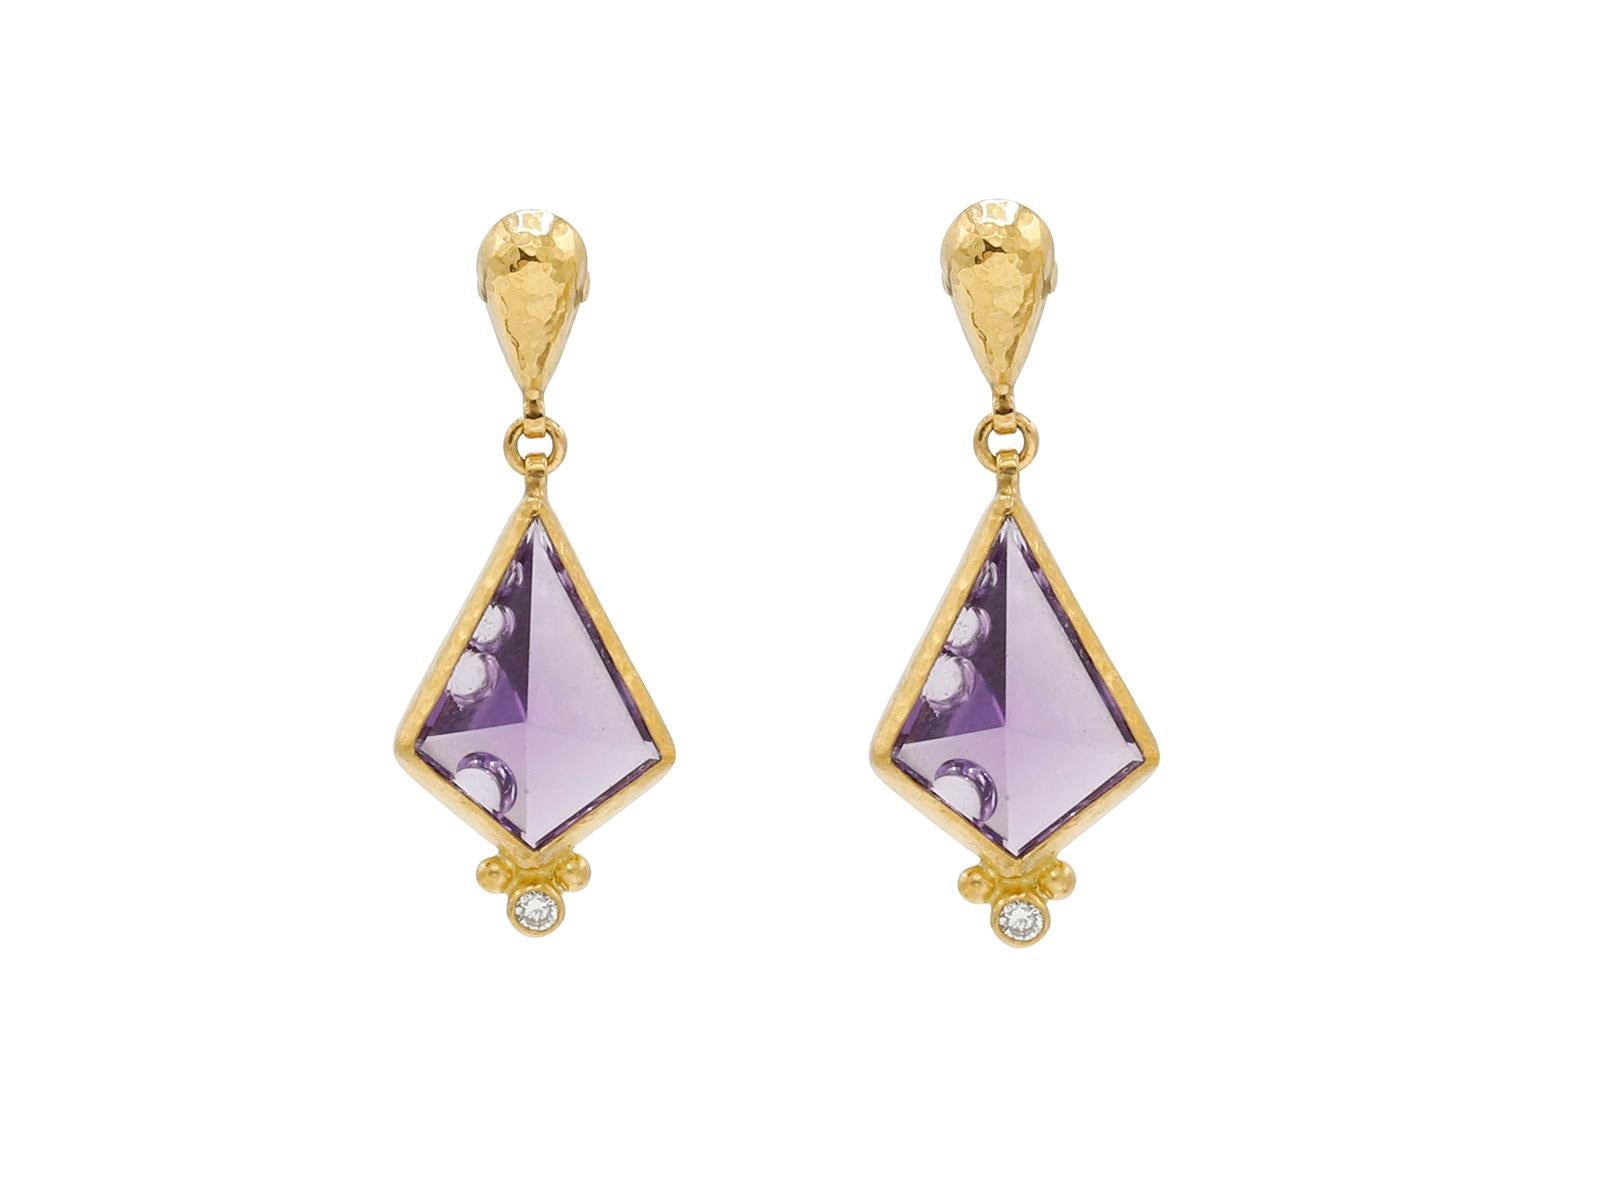 One-of-a-Kind Gold Drop Earrings, from the Prism Collection, Purple Teardrop Faceted Amethyst and Diamonds 0.17ct 1.55 inches

“The unique quality of stones inspires my one of a kind creations. When I select a stone I usually have a vision of how I